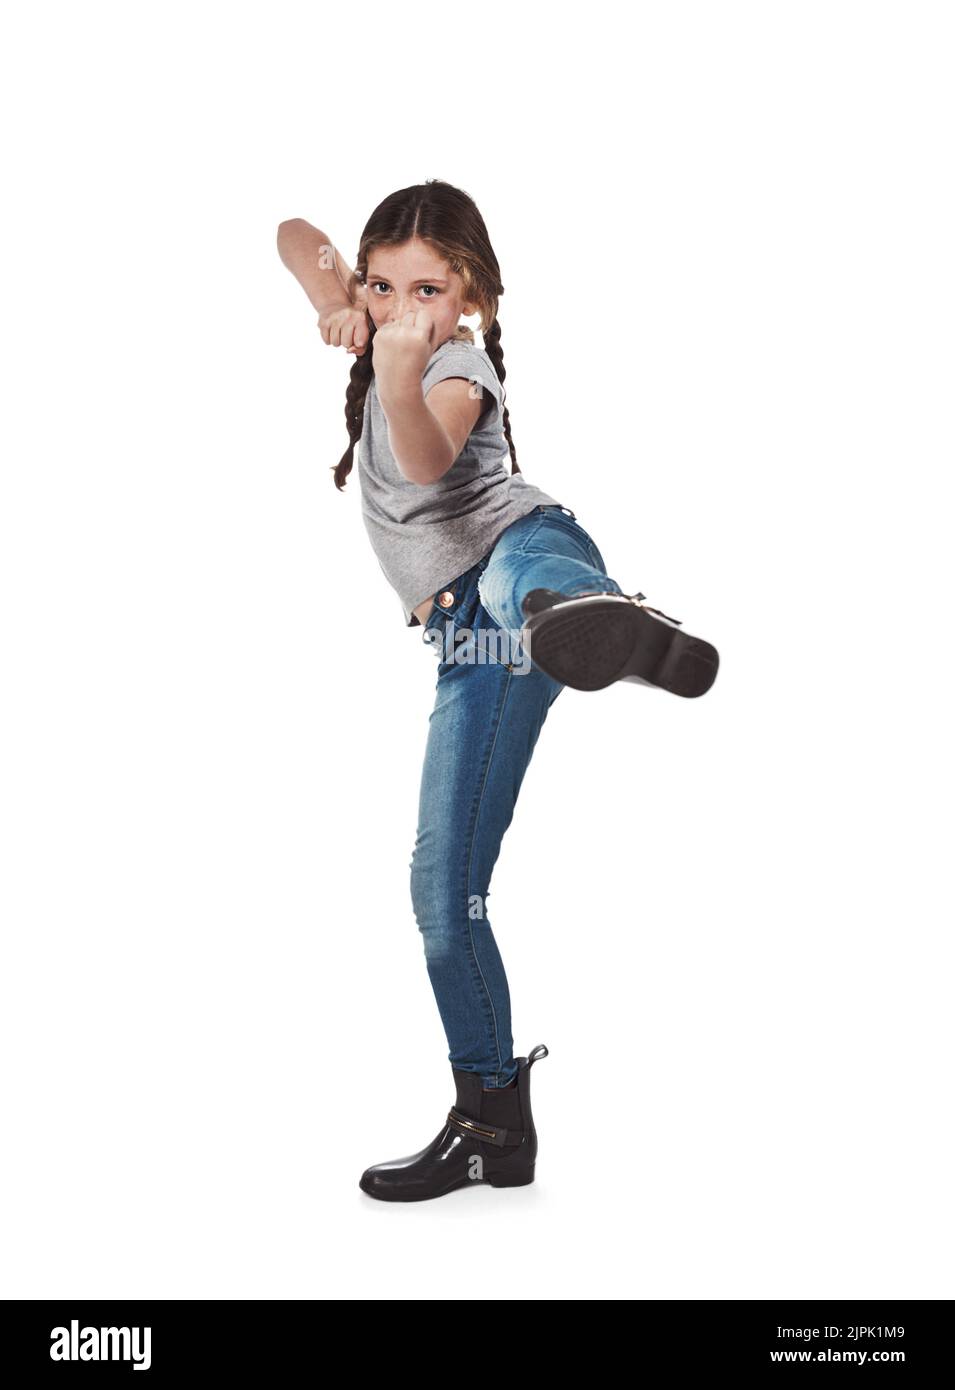 Fierce has no age. Studio portrait of a tough young girl defending herself against a white background. Stock Photo